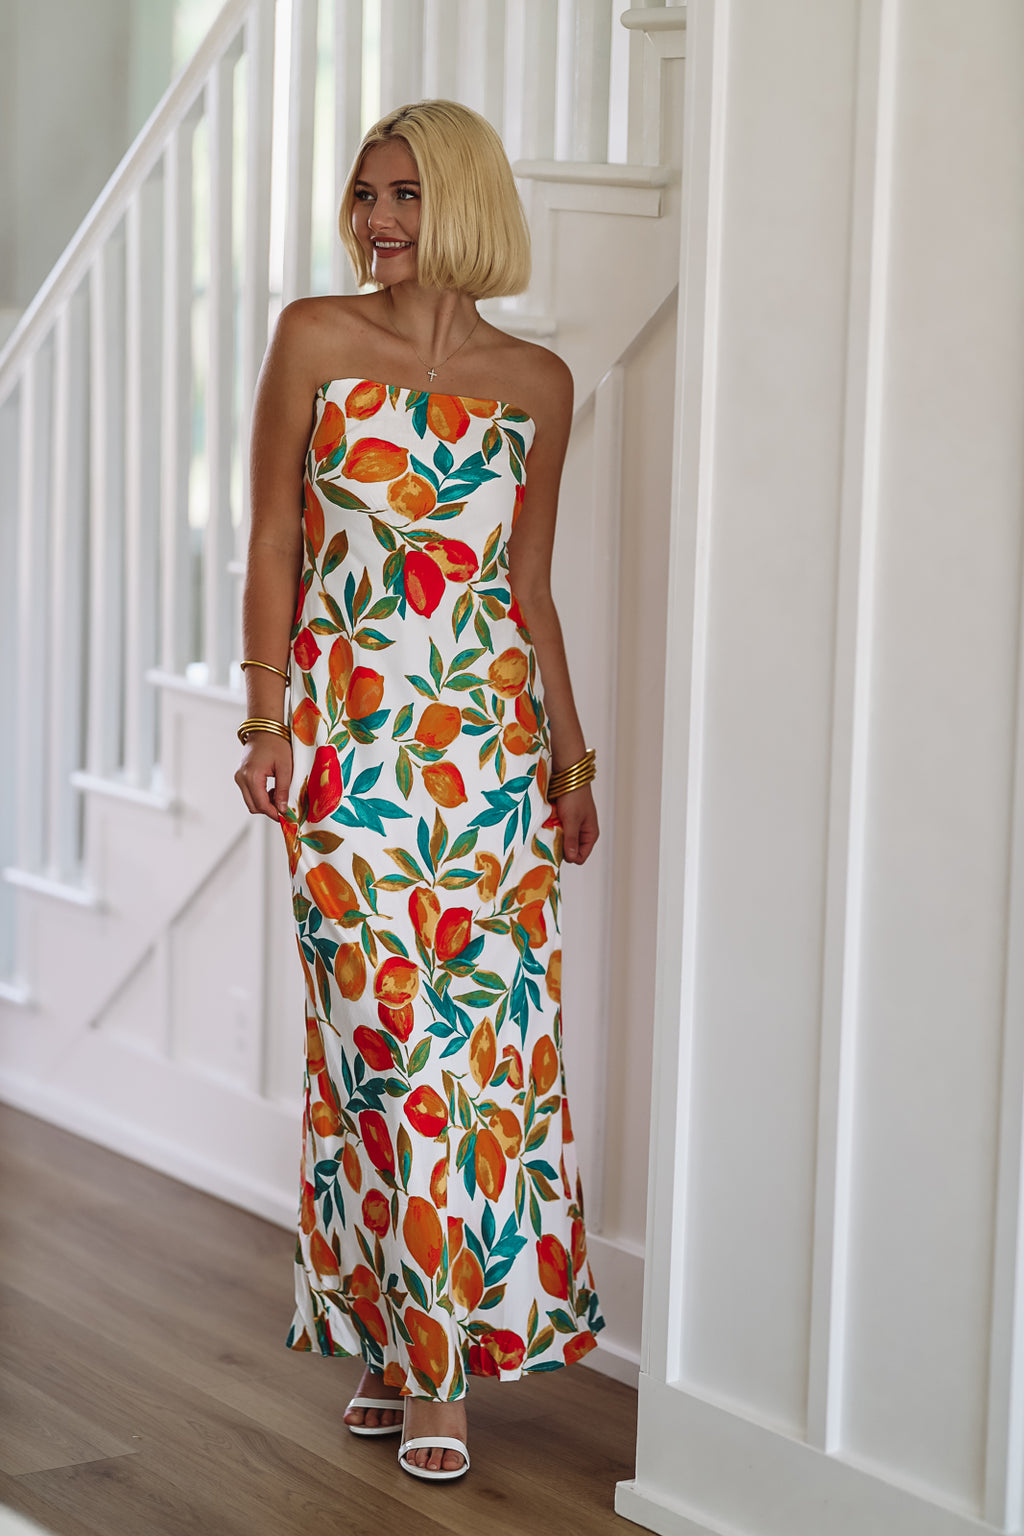 In the Grove Maxi Dress - White, Orange and Green